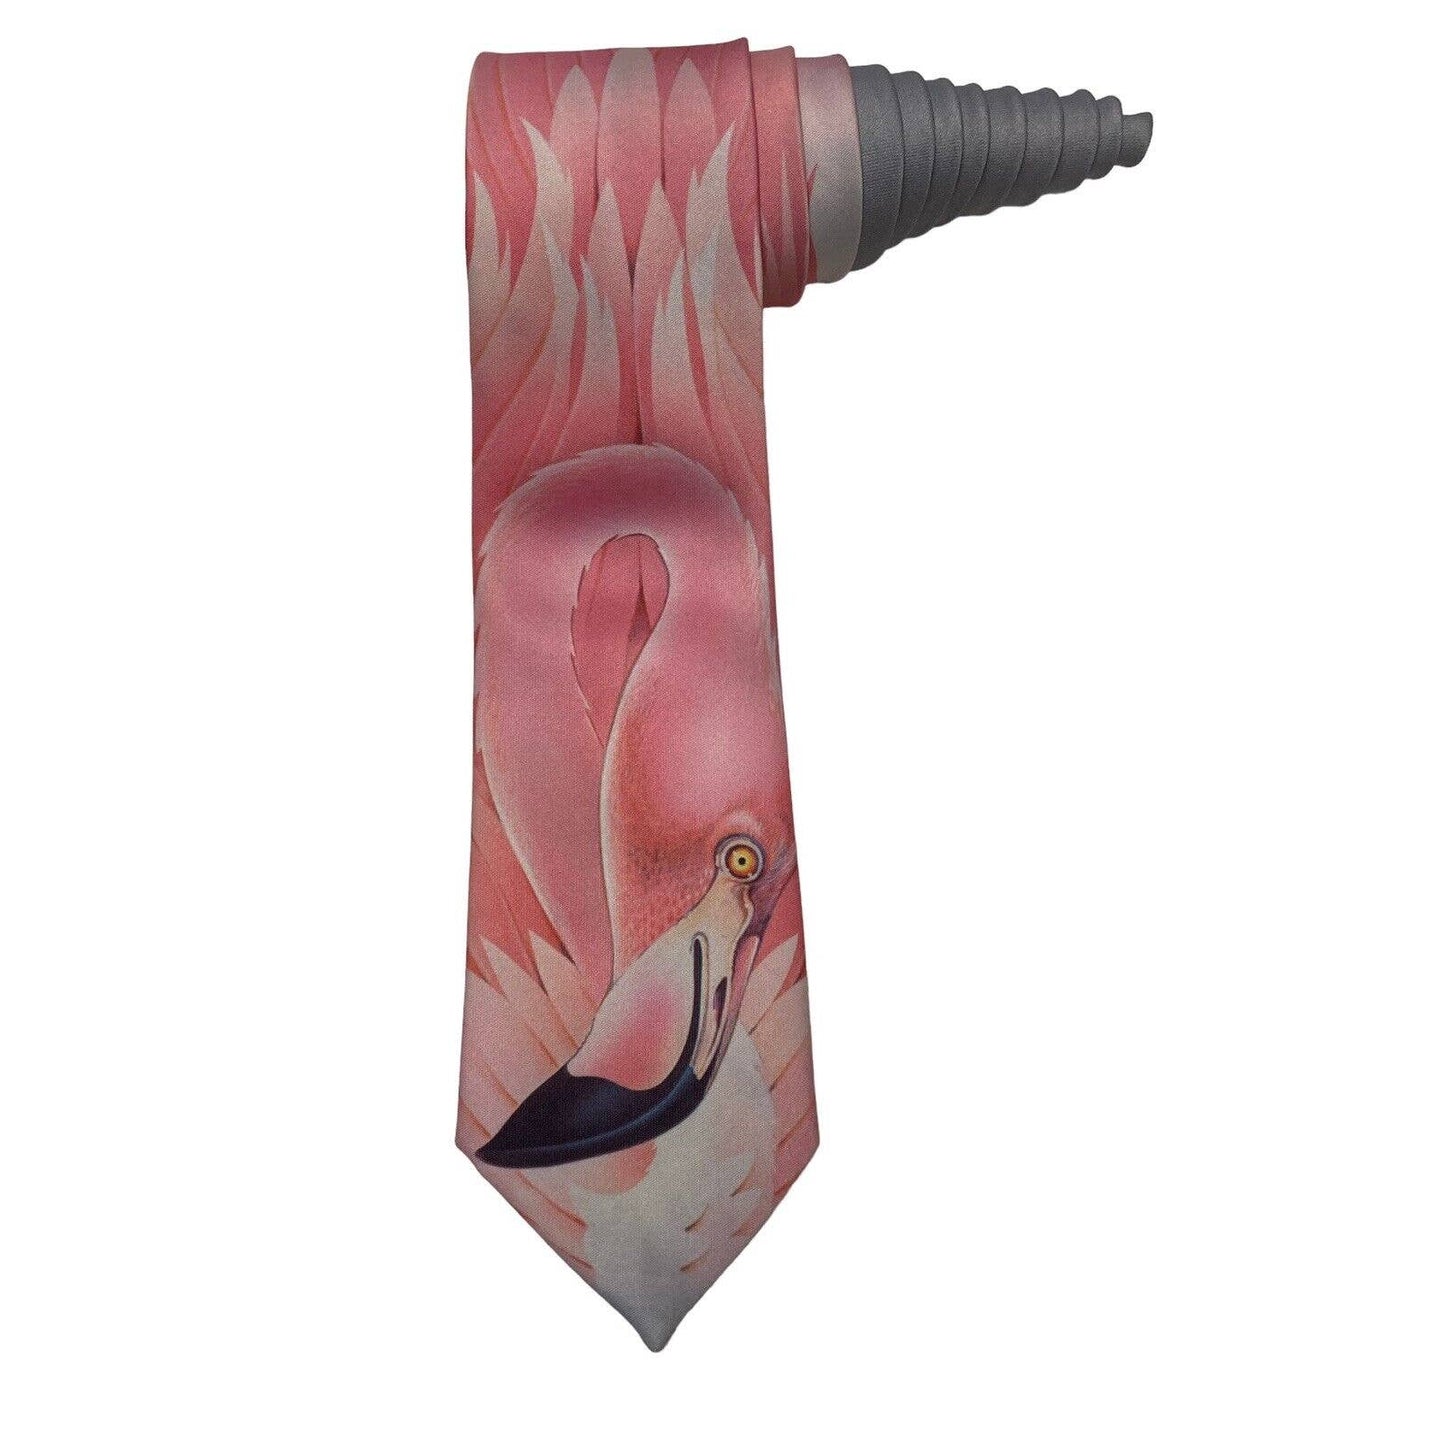 Watson Brothers Pink Flamingo Vintage Novelty Necktie Polyester